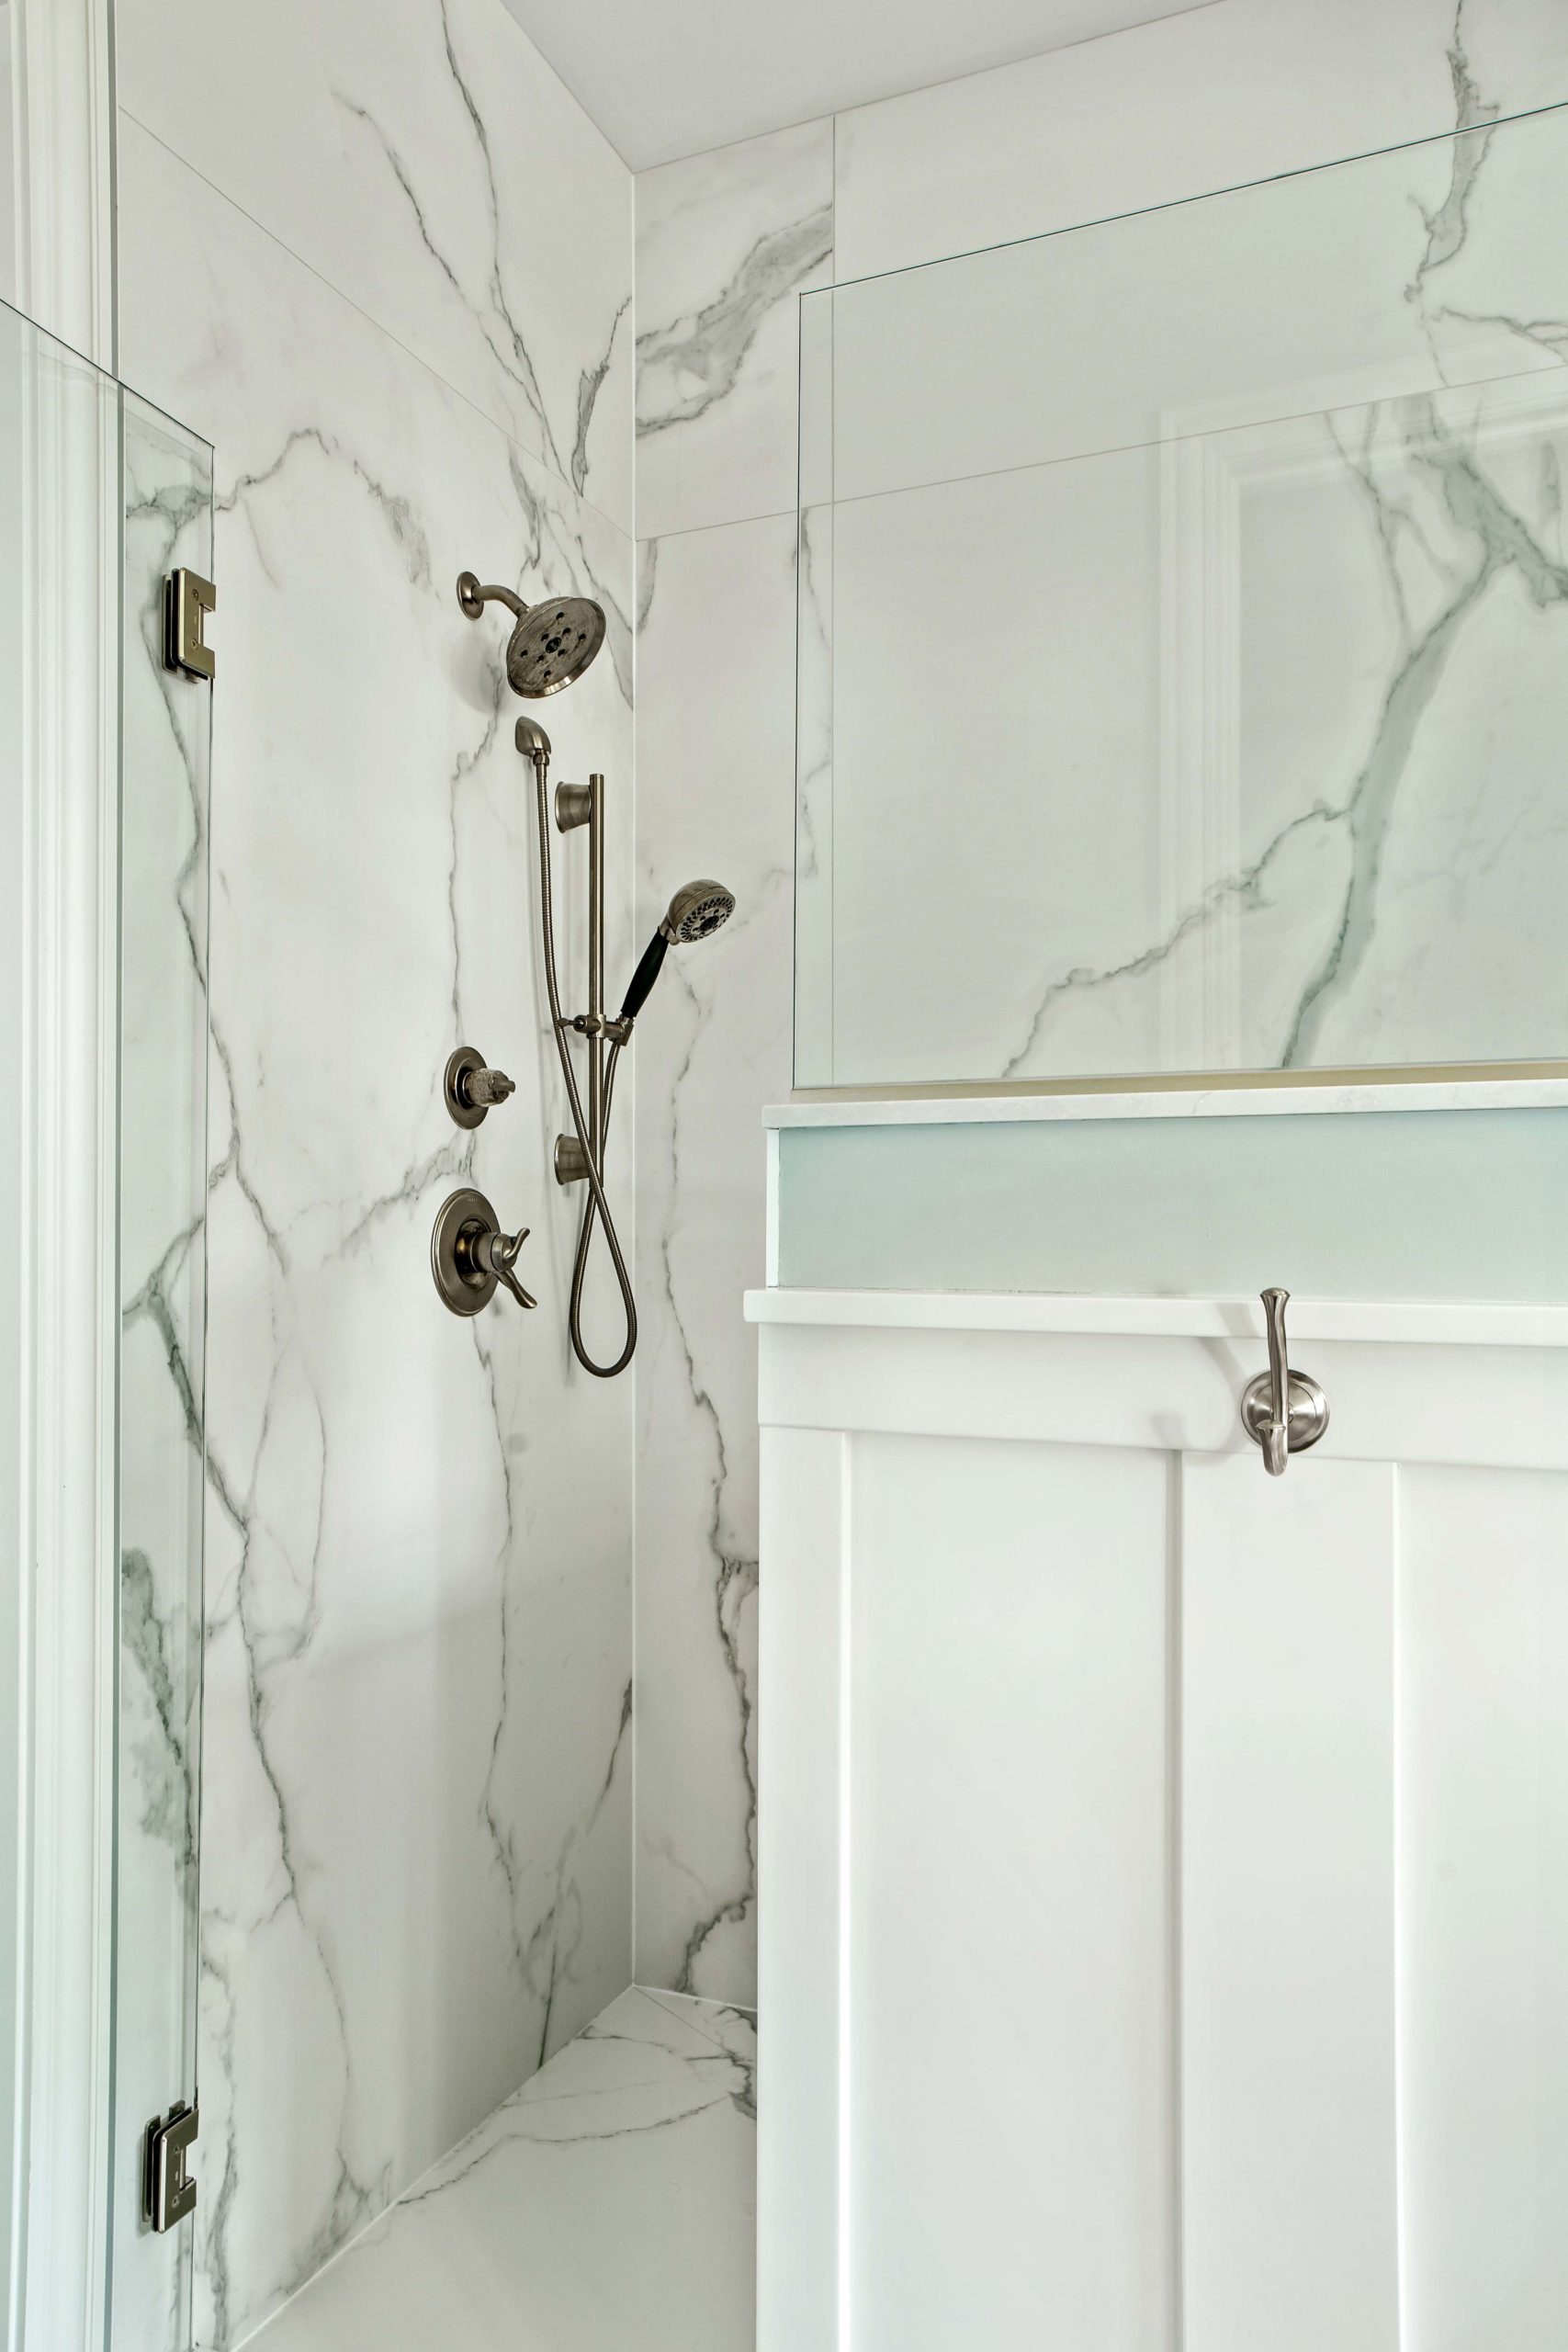 The Lake Escape custom home remodel features a white bathroom with marble walls and a glass shower door.